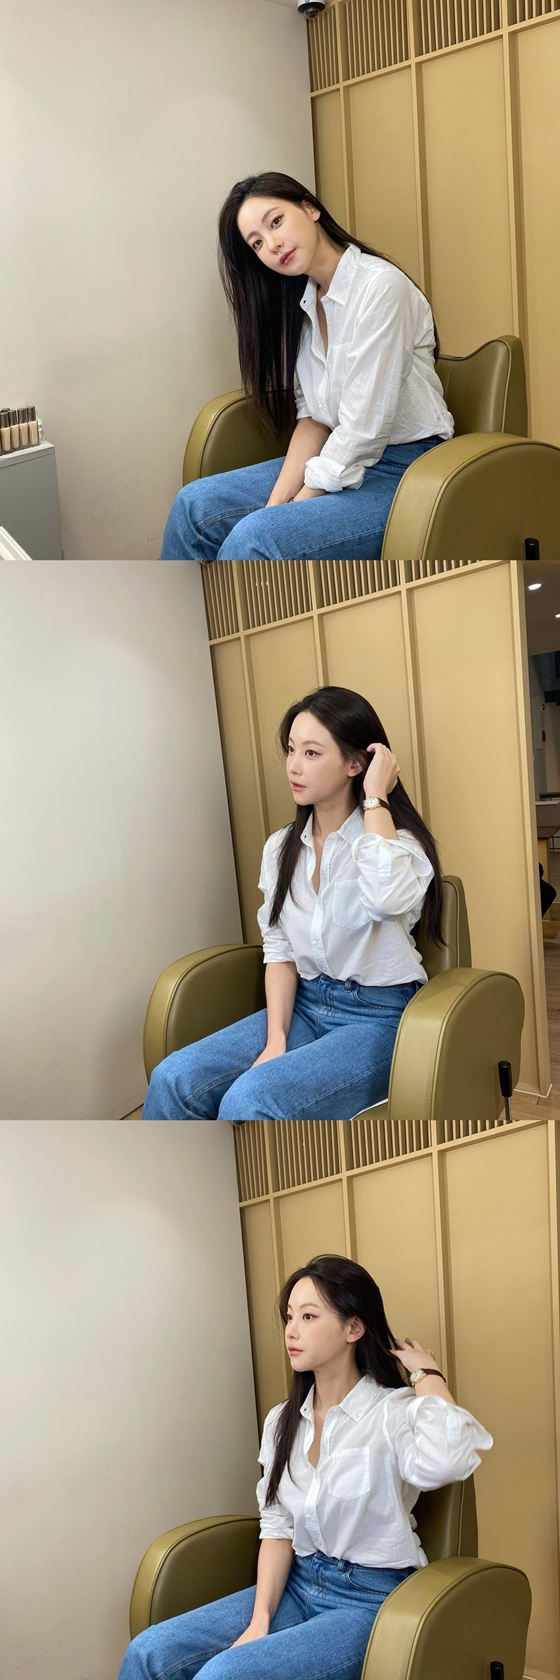 Actor Oh Yeon-seo shows off Cheongsun Beautiful looksOh Yeon-seo posted several photos on his Instagram on the afternoon of the 13th.In the public photos, Oh Yeon-seo is wearing a white shirt and jeans. Especially, Cheongsunmi is highlighted in unglamorous makeup.The pure beauty of this area reminds me of Oh Yeon-seo.On the other hand, Oh Yeon-seo played the role of the heroine Lee Min-kyung in the original Kakao TV drama Crazy X of this area which last June.